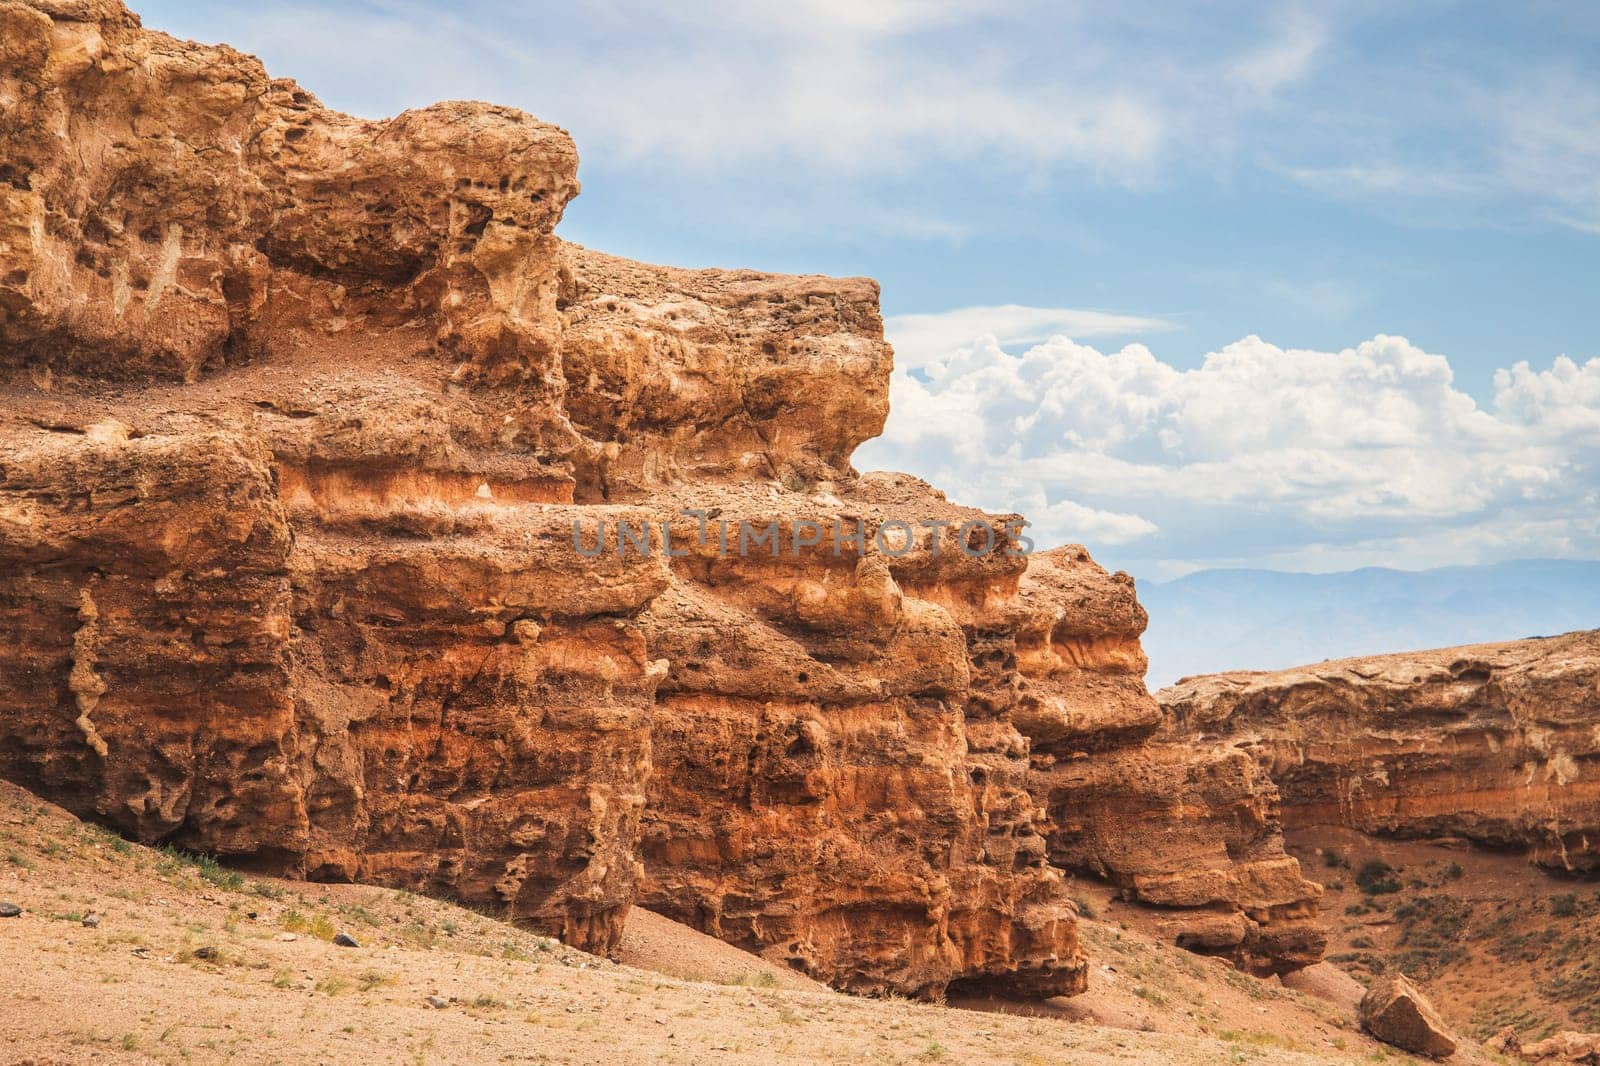 Beautiful nature of Central asia, Charyn canyon in Almaty region of Kazakhstan.